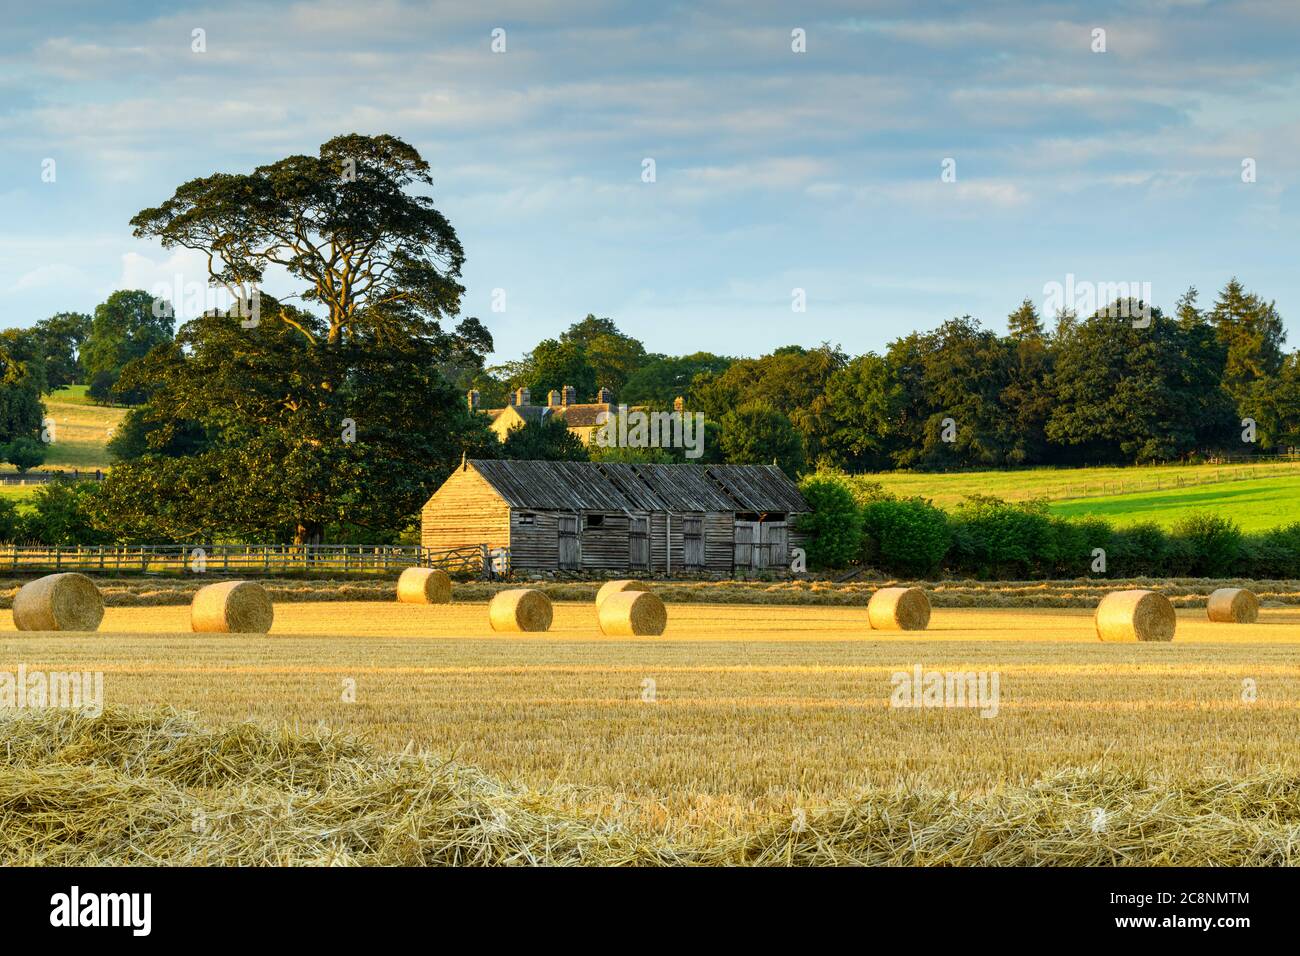 Scenic rural landscape (straw bales in farm field after wheat harvest, rustic wooden barn & sunlight on green pastures) - North Yorkshire, England UK. Stock Photo